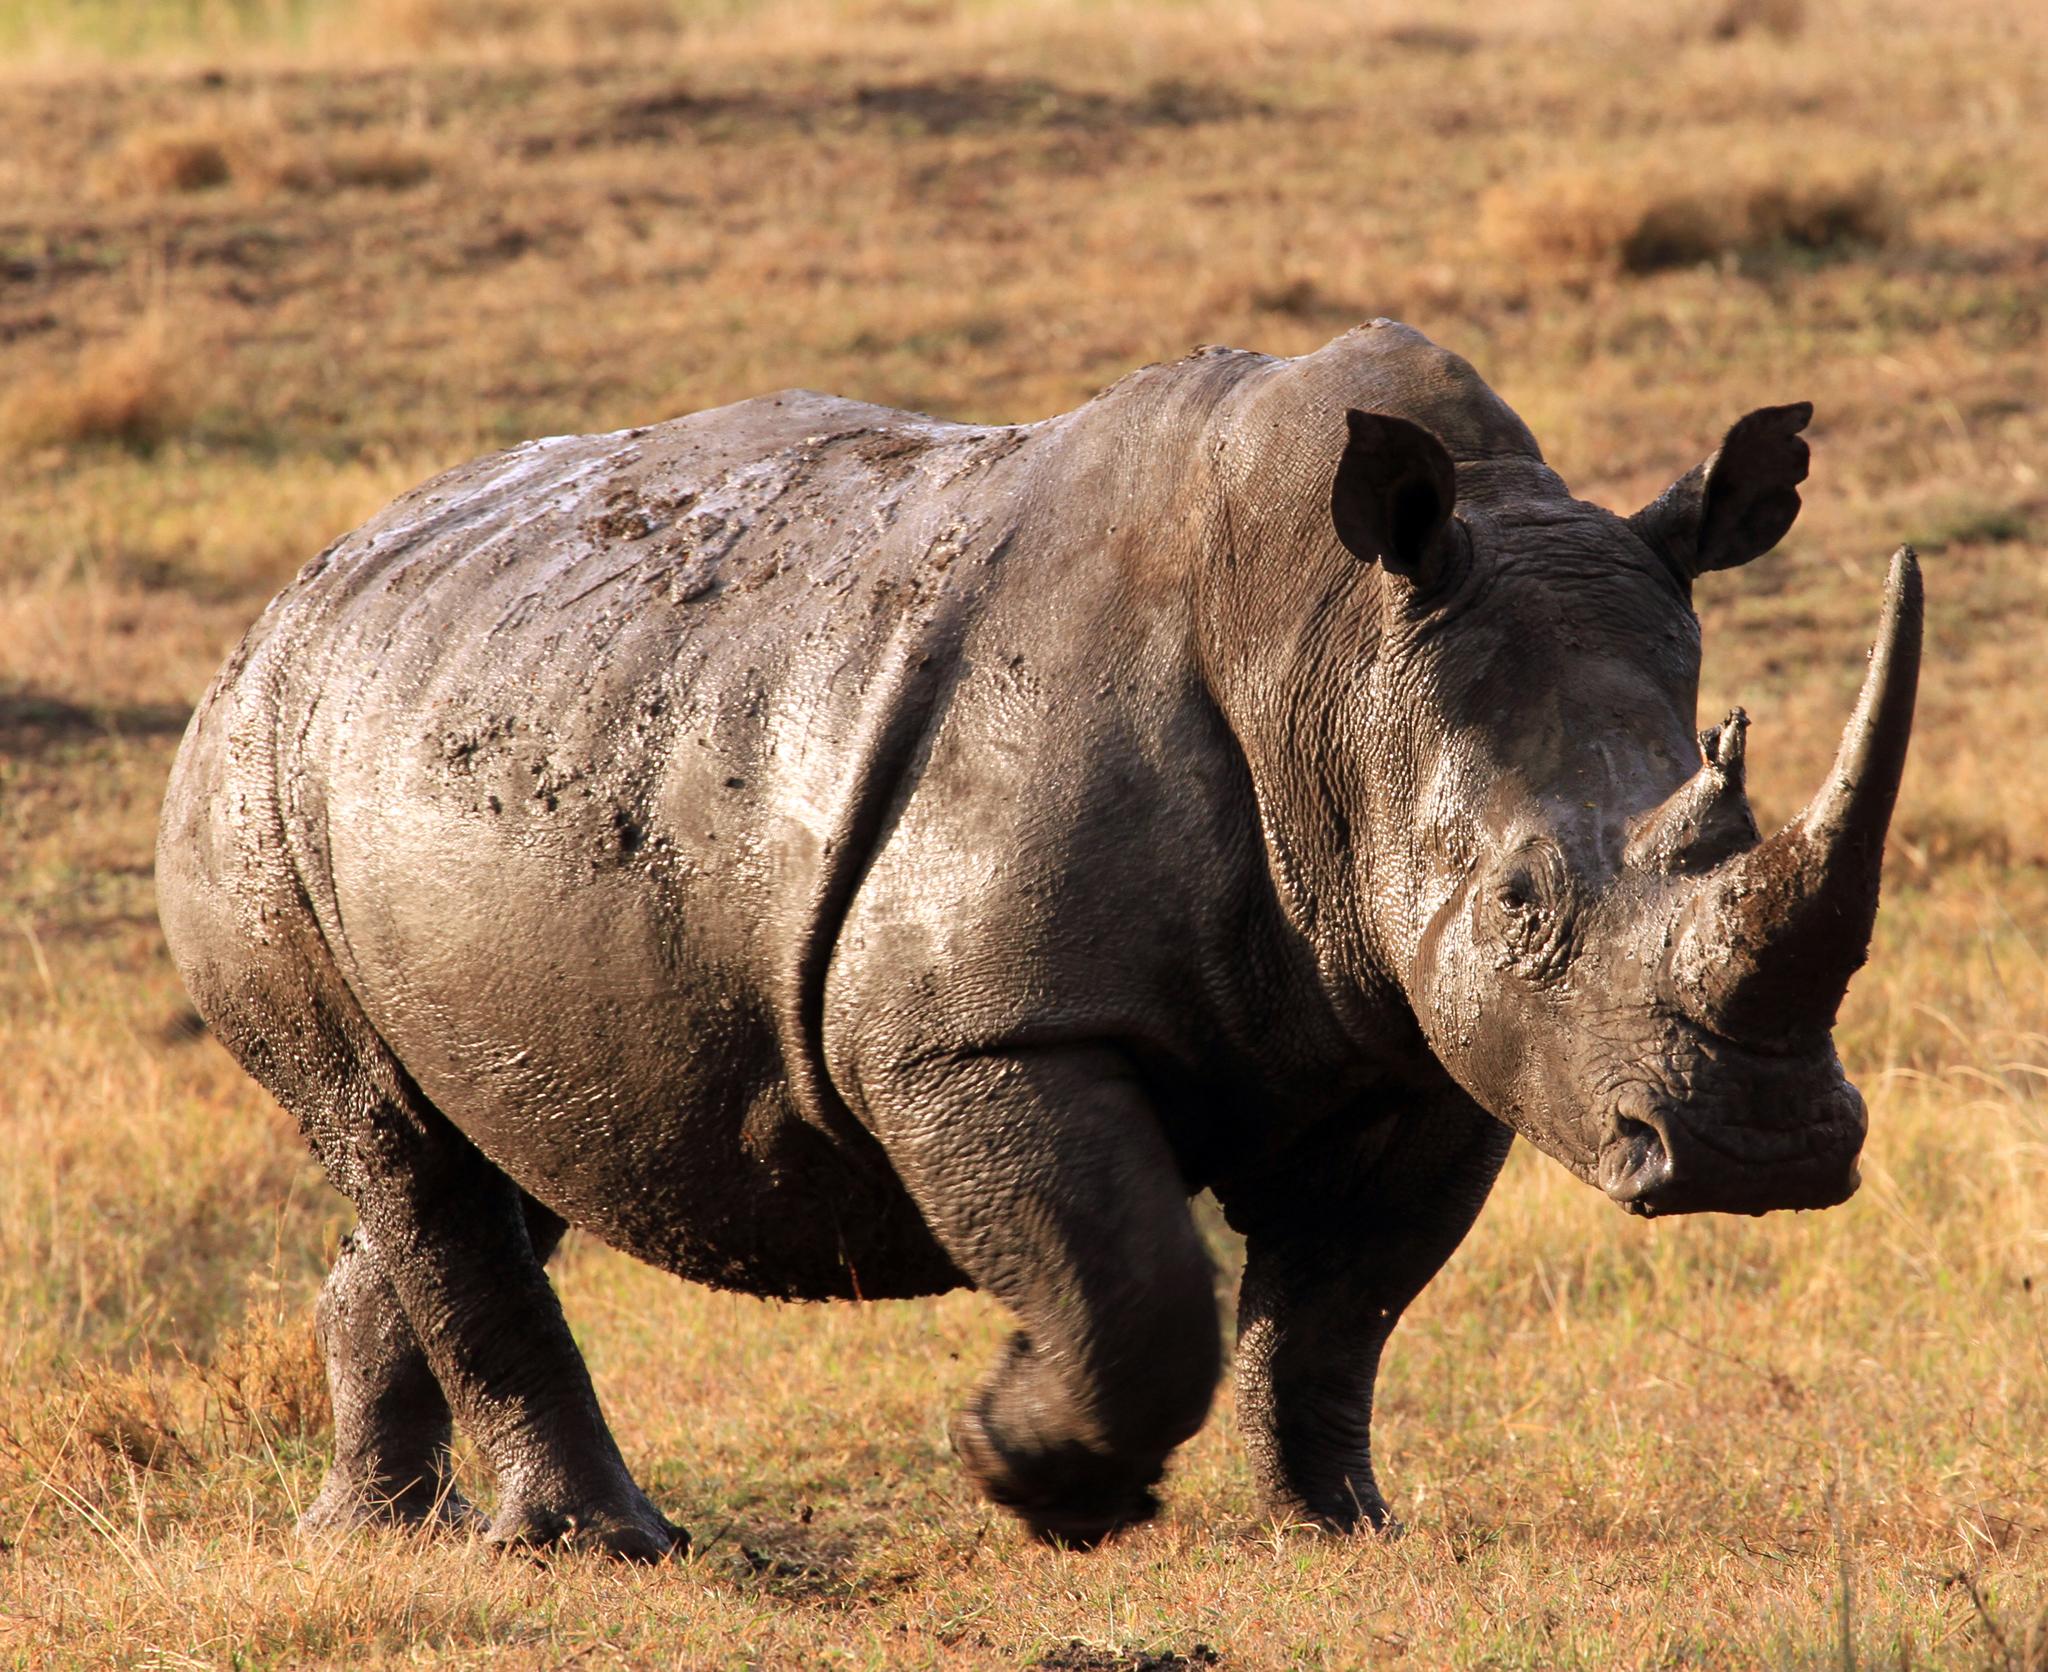 The rhino 'appeared from nowhere' to attack Mr Muharukua, according to local police